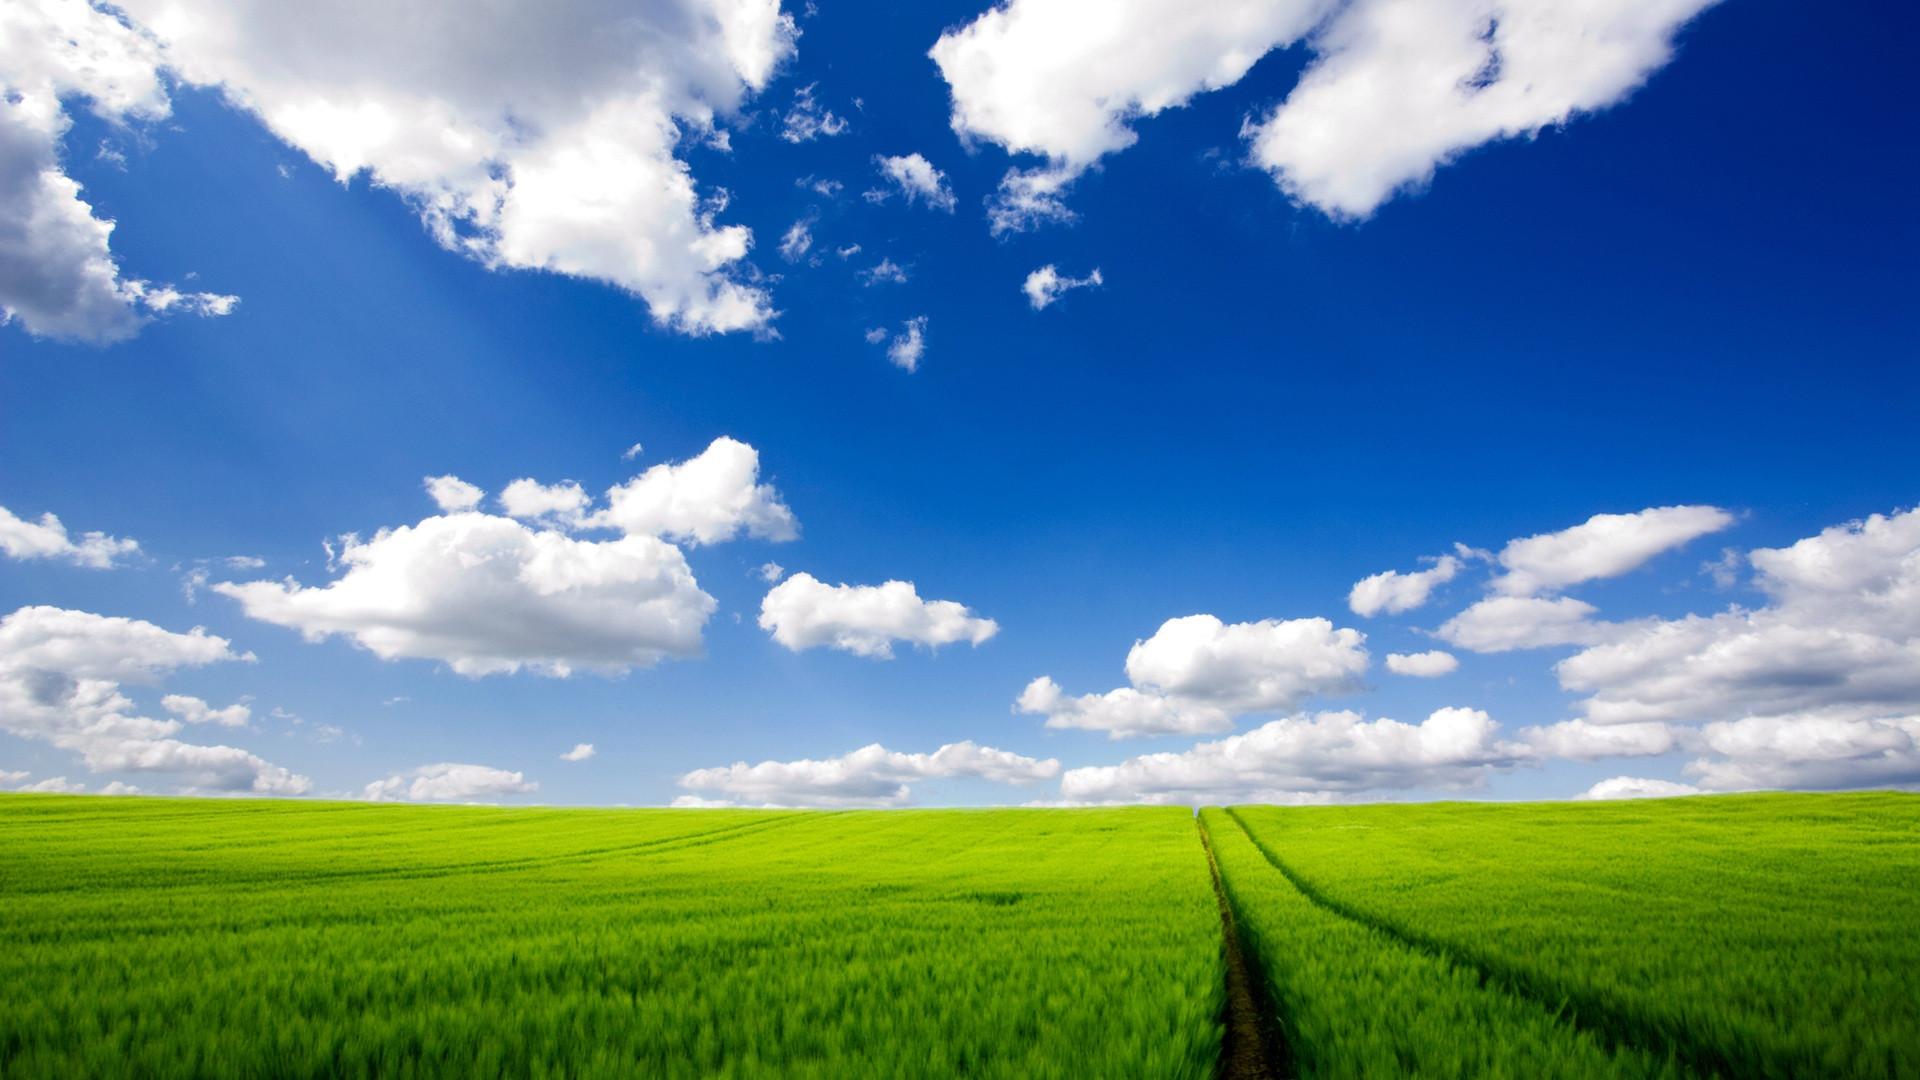 Download 45 Hd Windows Xp Wallpapers For Free HD Wallpapers Range